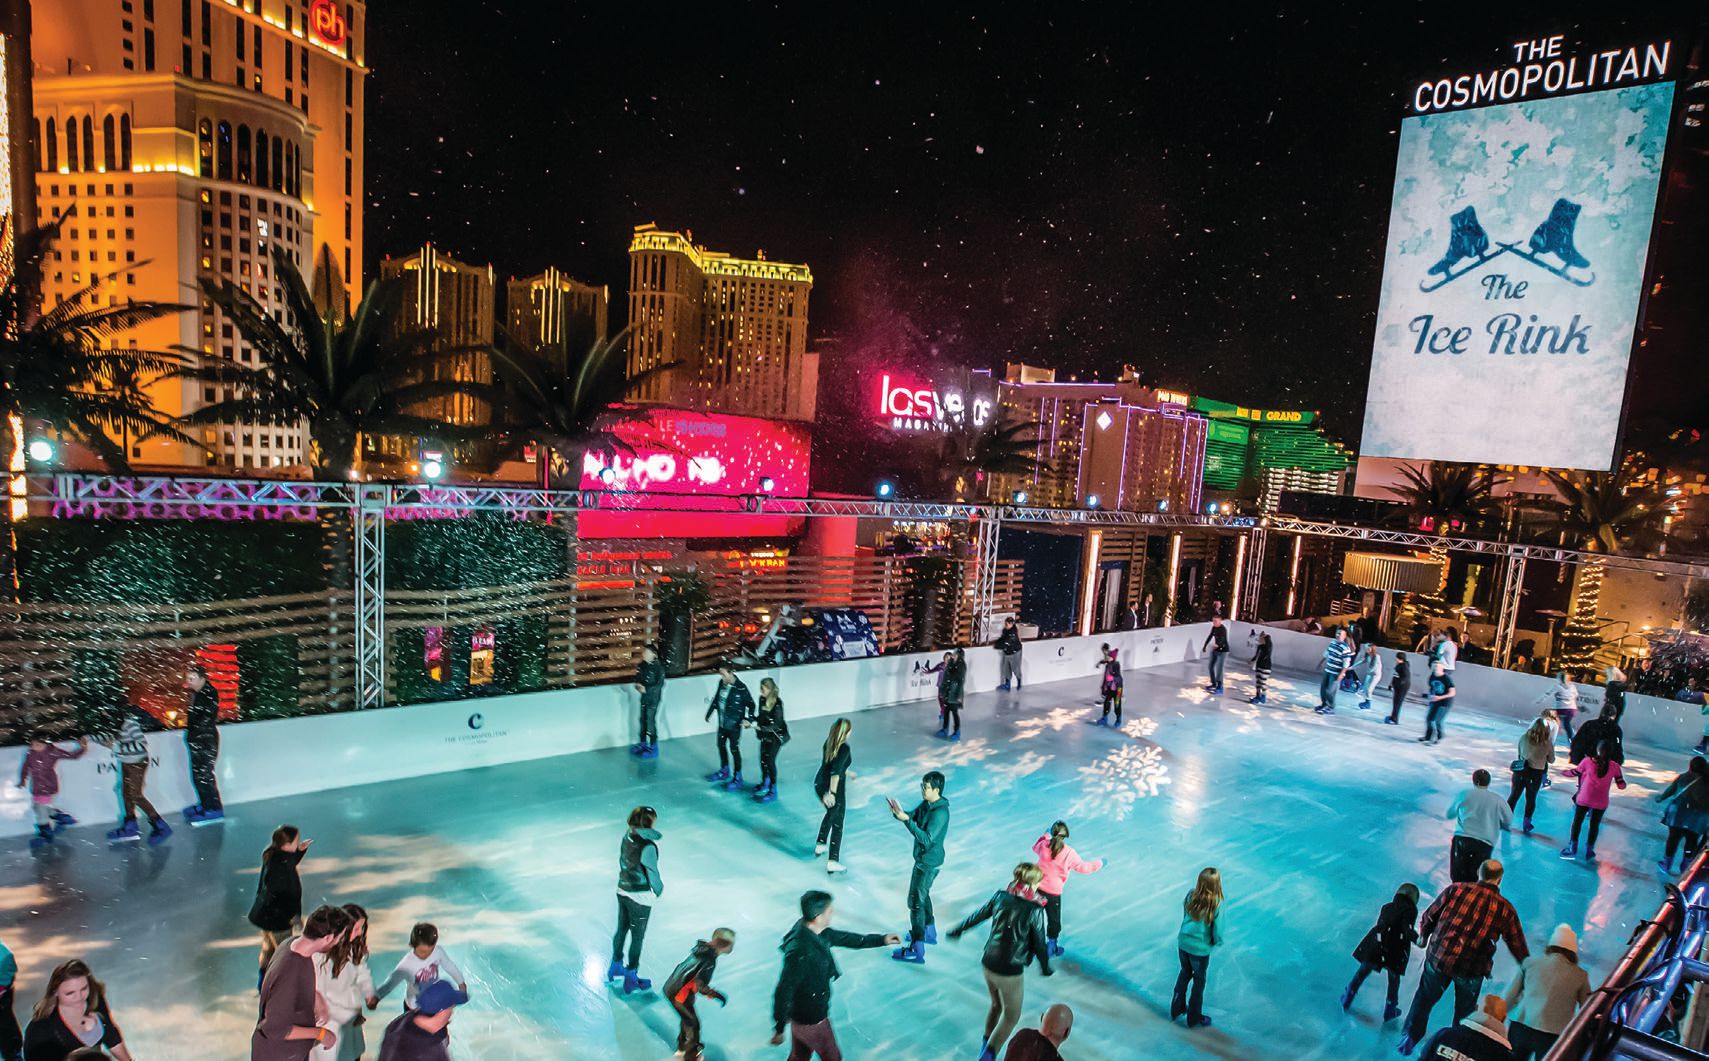 The Cosmopolitan of Las Vegas’ rooftop ice rink PHOTO COURTESY OF BRANDS